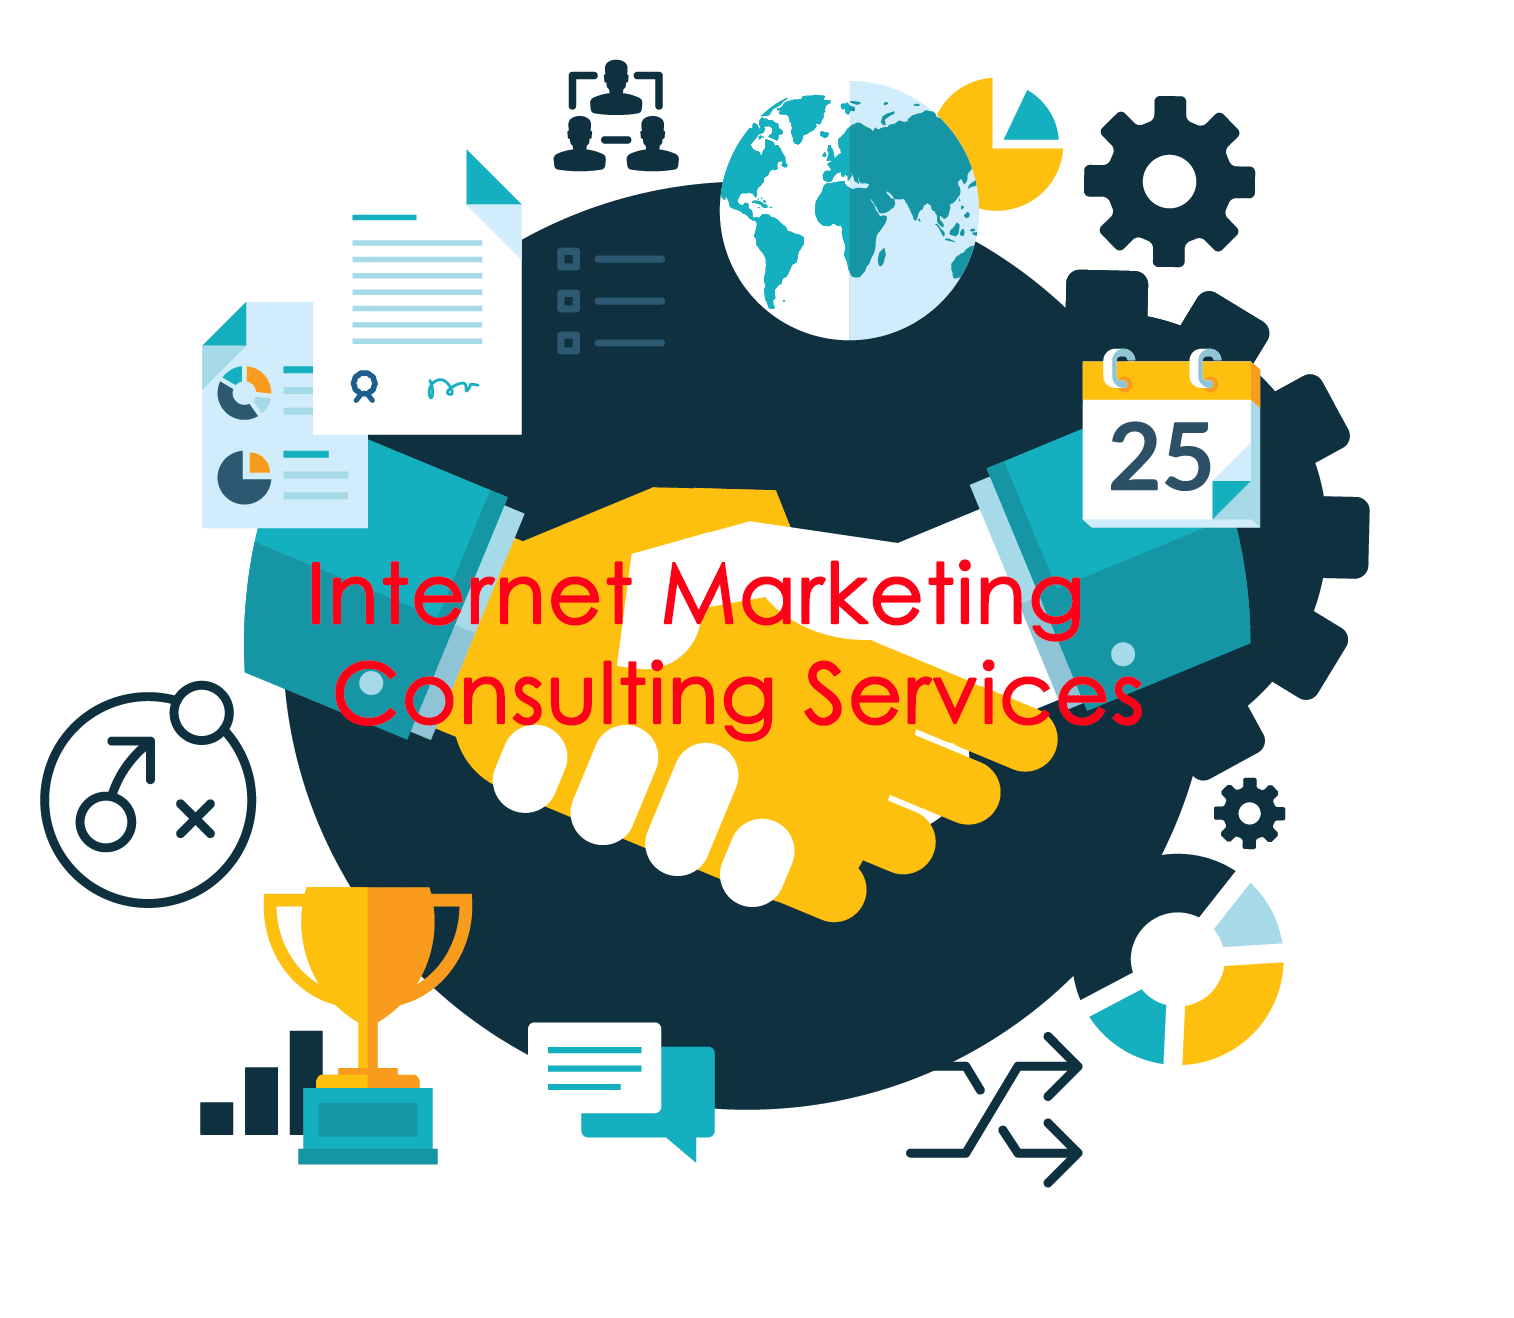 Internet Marketing Consulting Service 